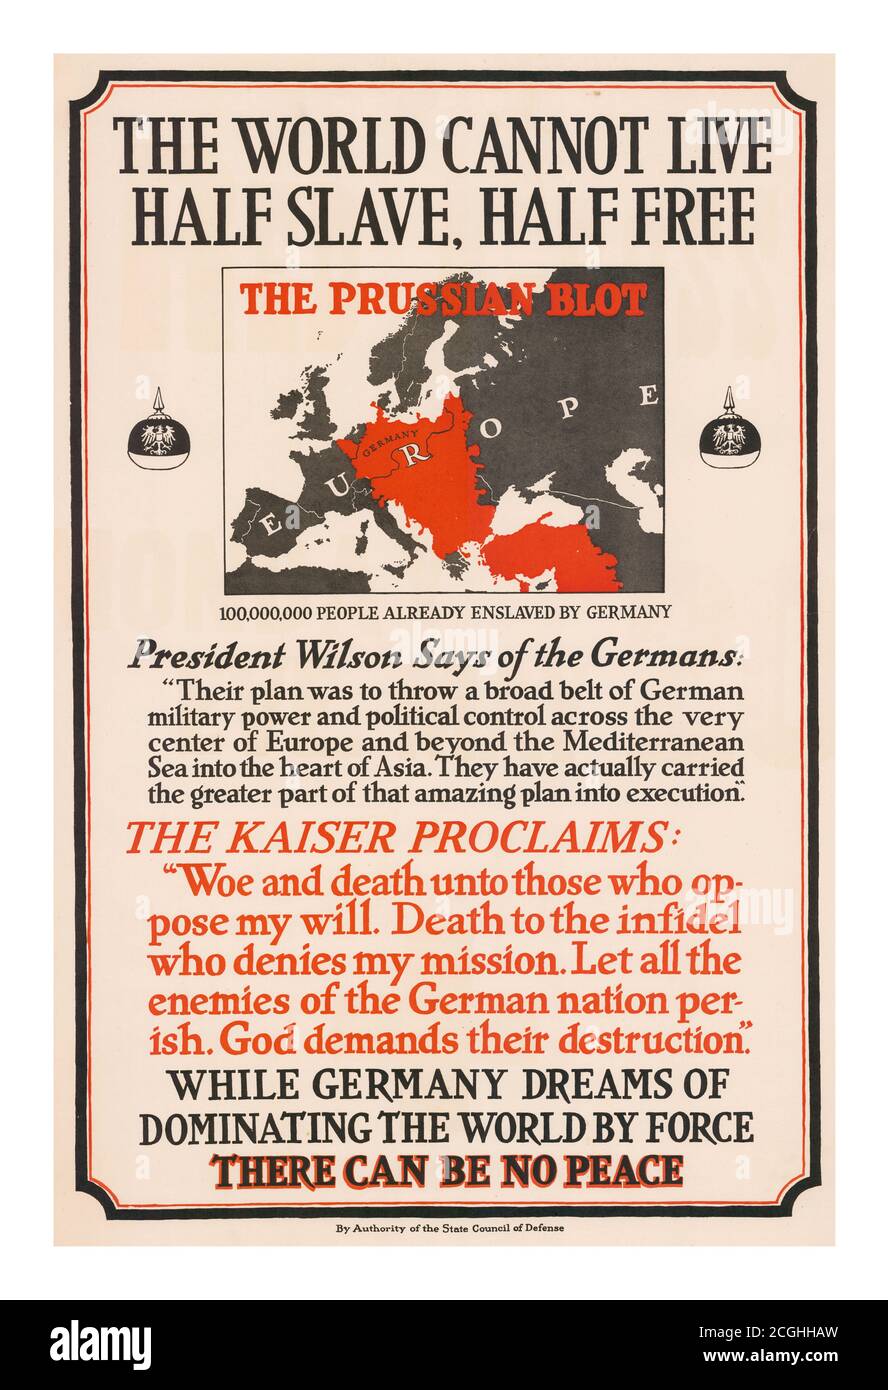 Vintage 1900’s Propaganda Poster ‘The World Cannot Live Half Slave, Half Free. The Prussian Blot’: 100,000,000 People Already Enslaved By Germany. This poster was published by the American State Council of Defense. It displays a pointed threat from the Kaiser and a quote from Wilson about the reach of German ambition. (Wilson's statement is from a speech he gave on Flag Day, June 14, 1917.) Poster displays a map of Europe and Turkey with a large red swath denoting the 'Prussian Blot.' Text includes quotations from President Wilson and Kaiser Wilhelm. Stock Photo